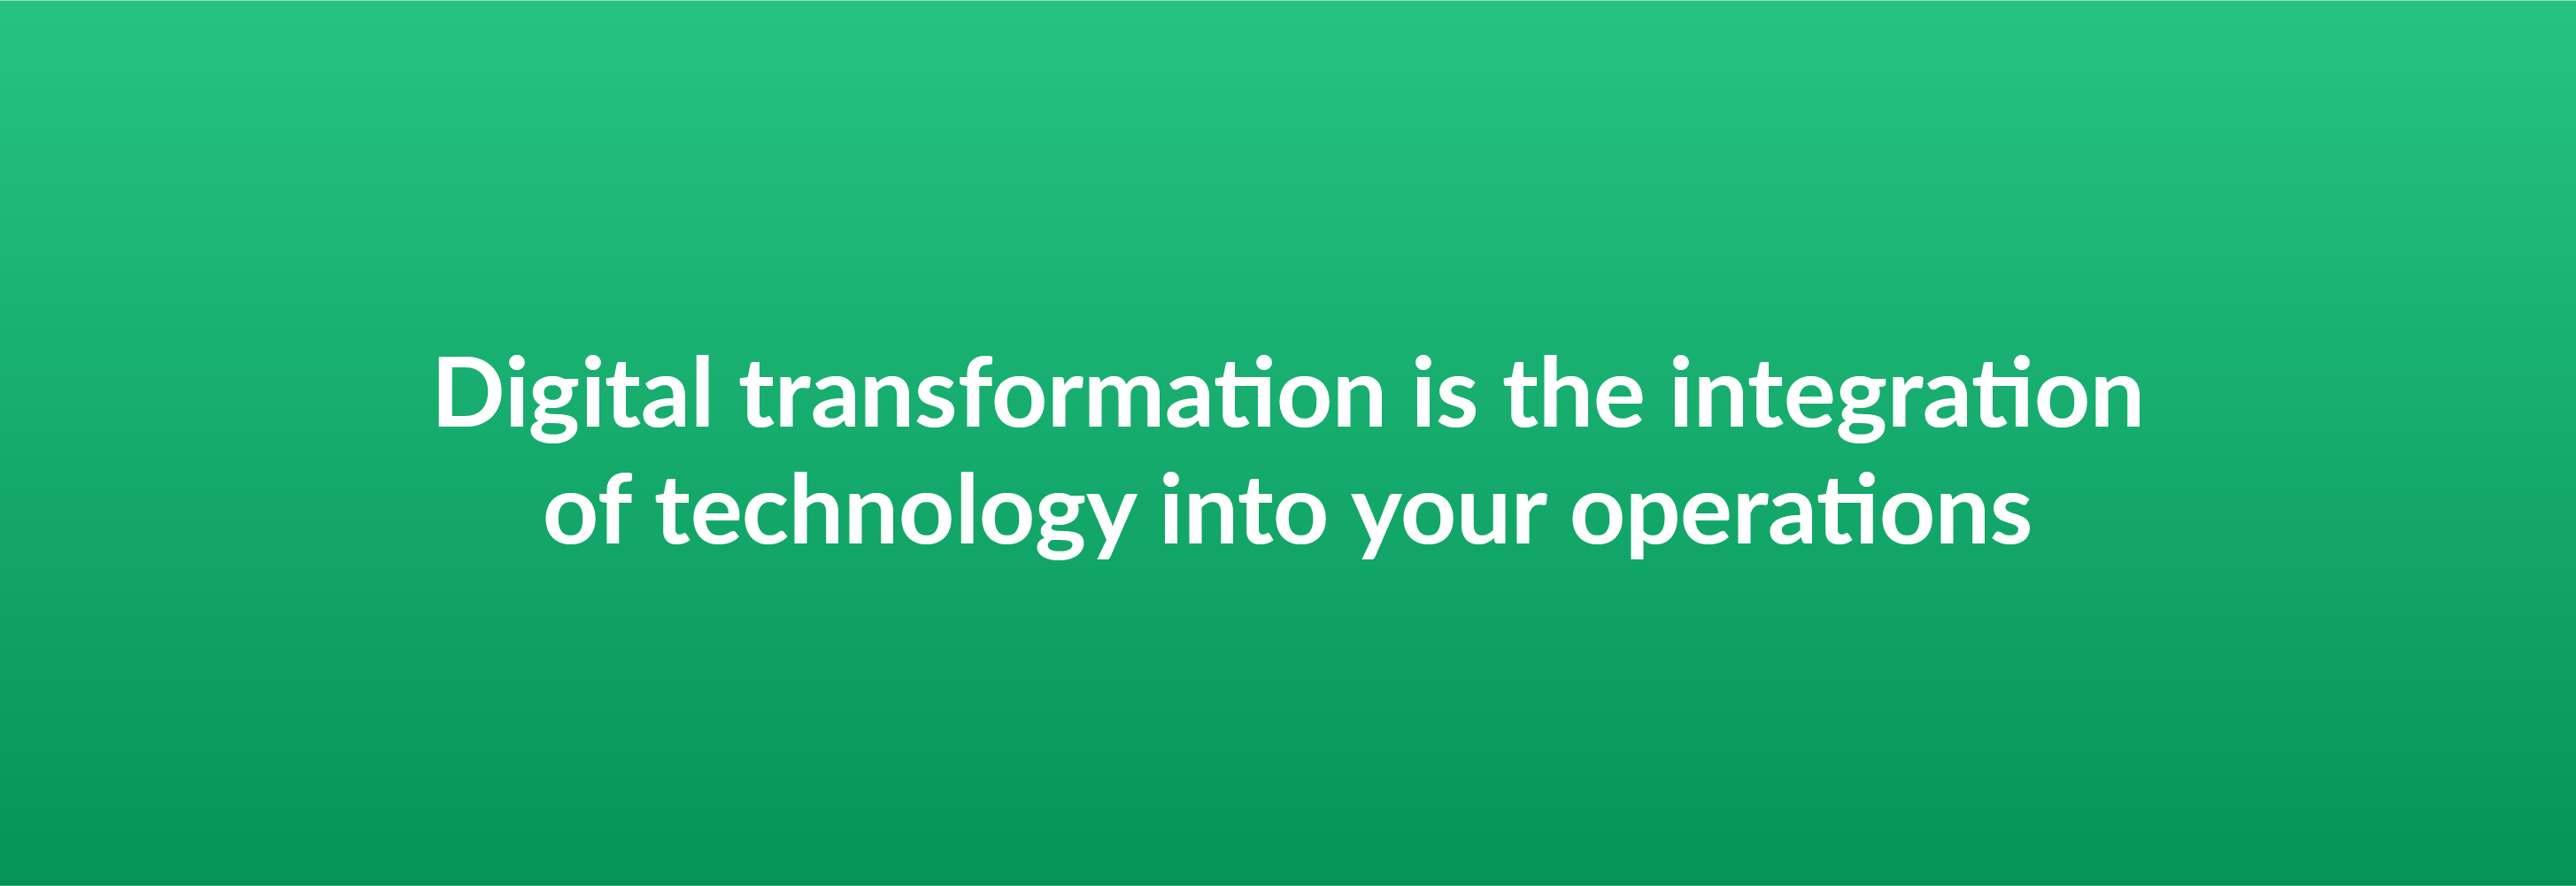 Digital transformation is the integration of technology into your operations